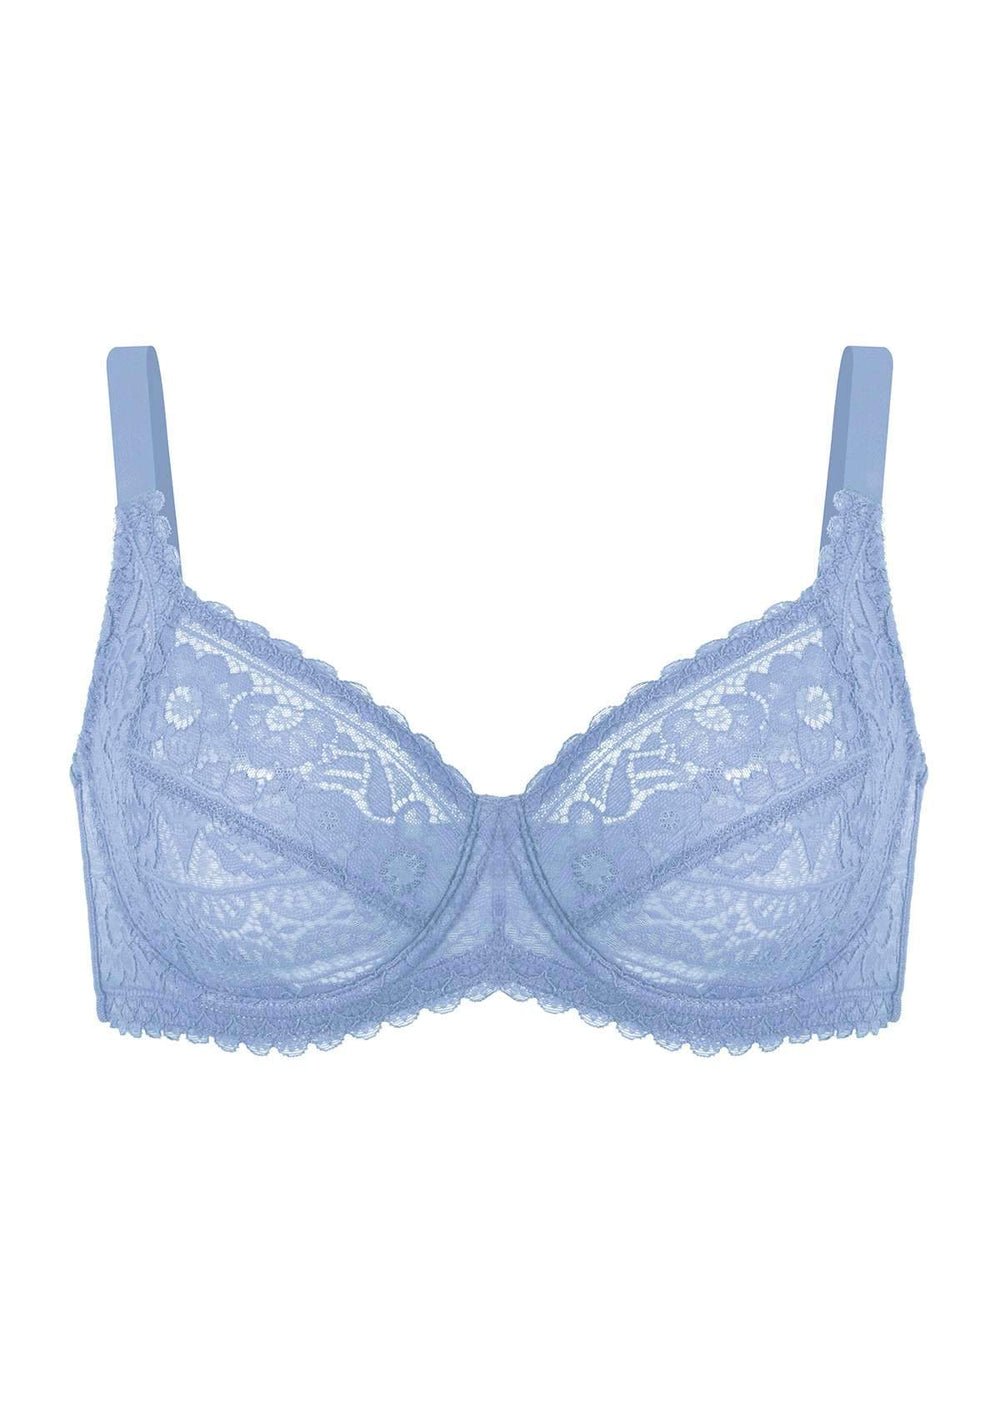 HSIA Blossom Blue Unlined Lace Bra - Blue Ashes / 42 / D